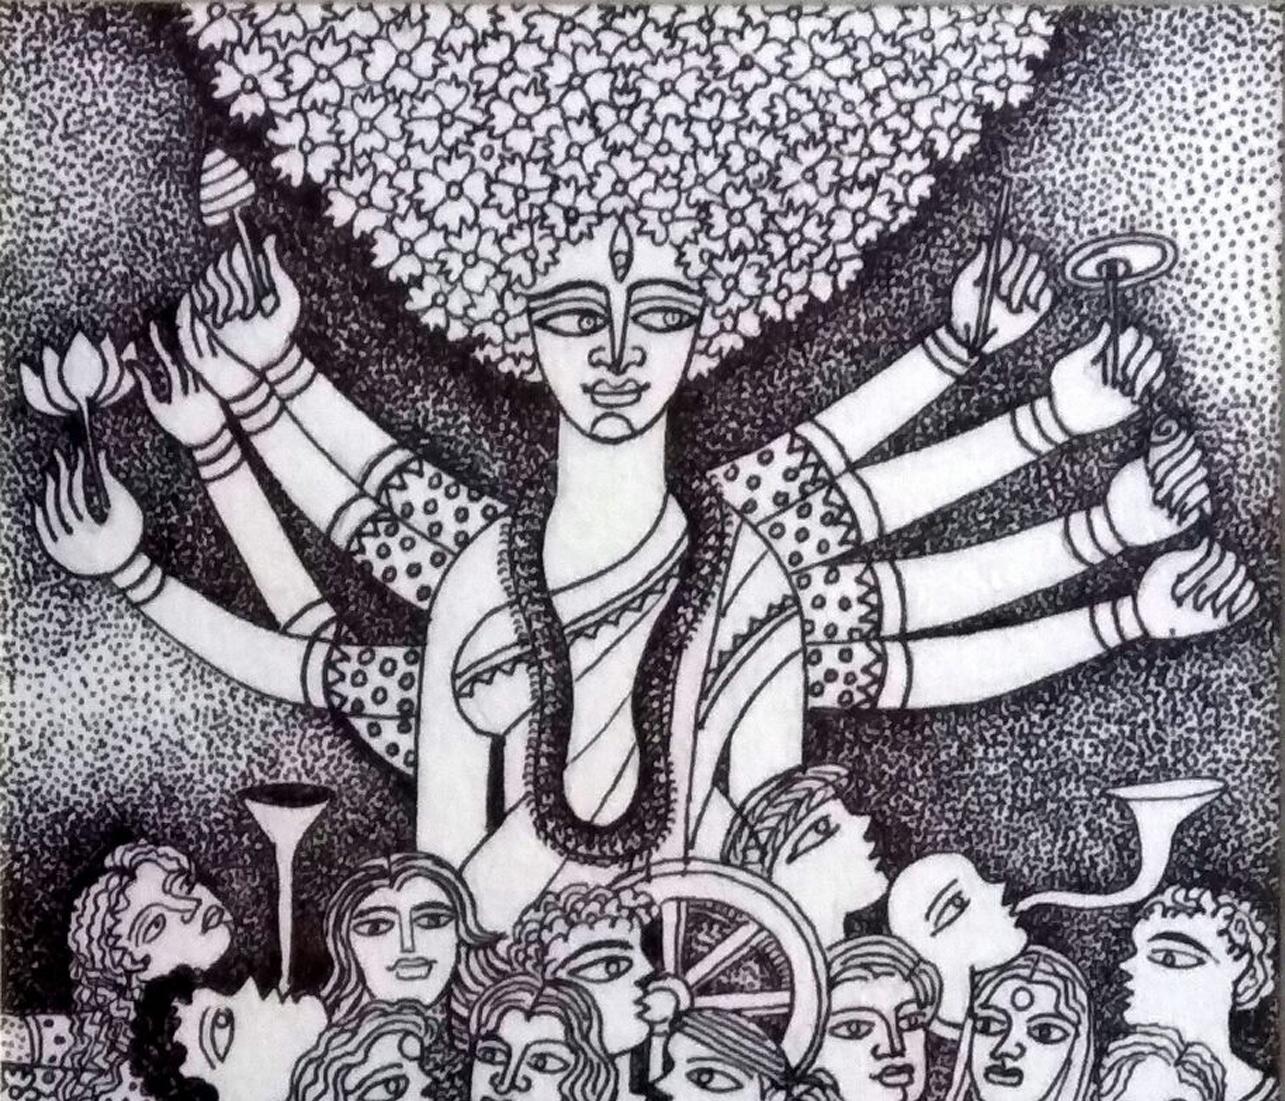 Indian Art; celebrating Indian goddess Durga, the destroyer by Ace Indian Artist - Painting by Shipra Bhattacharya